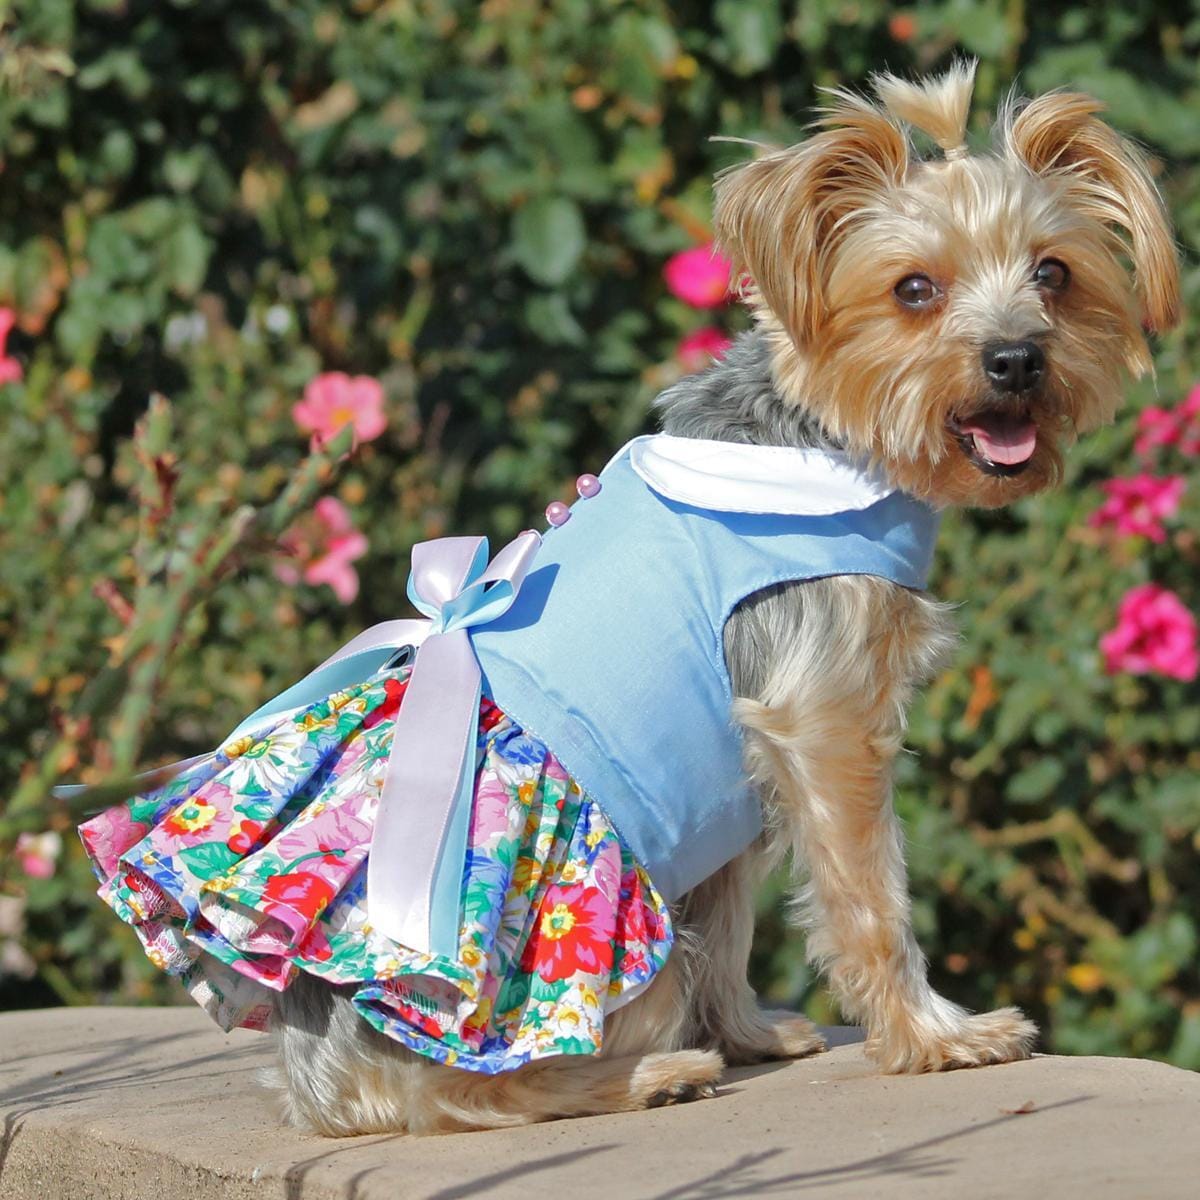 Blue and White Pastel Pearls Floral Dog Dress on a yorkie